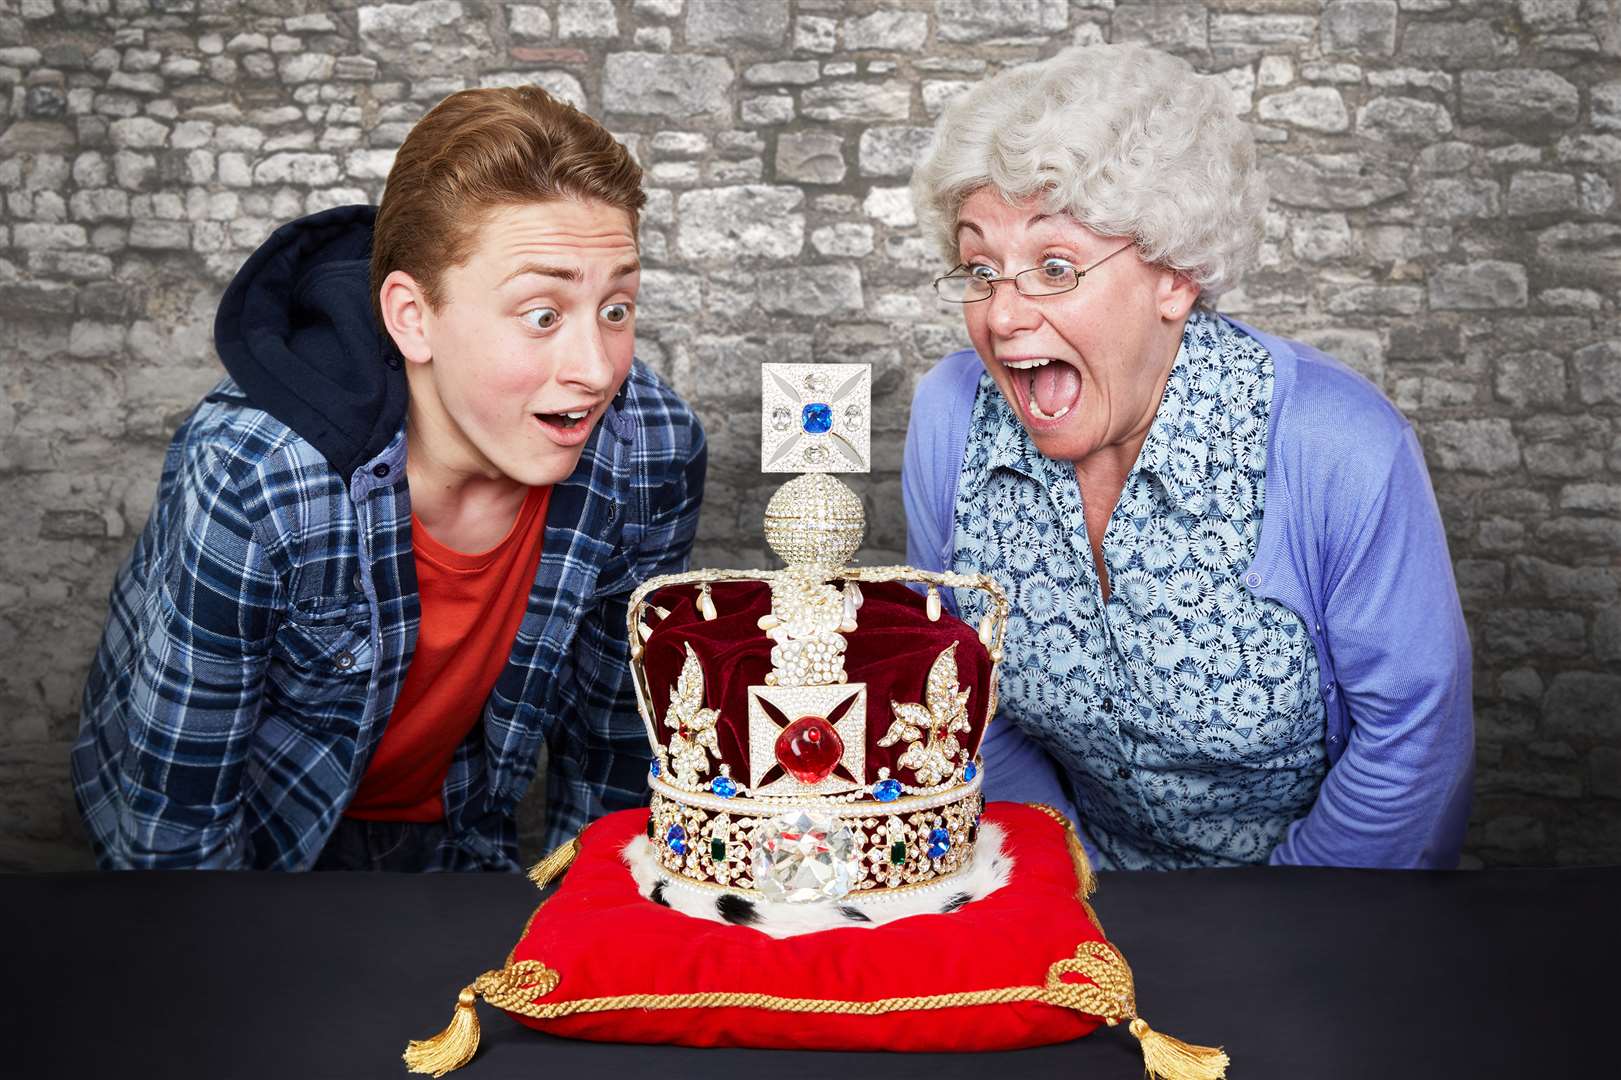 Ashley Cousins, who is playing Ben in Gangsta Granny, with Gilly his granny